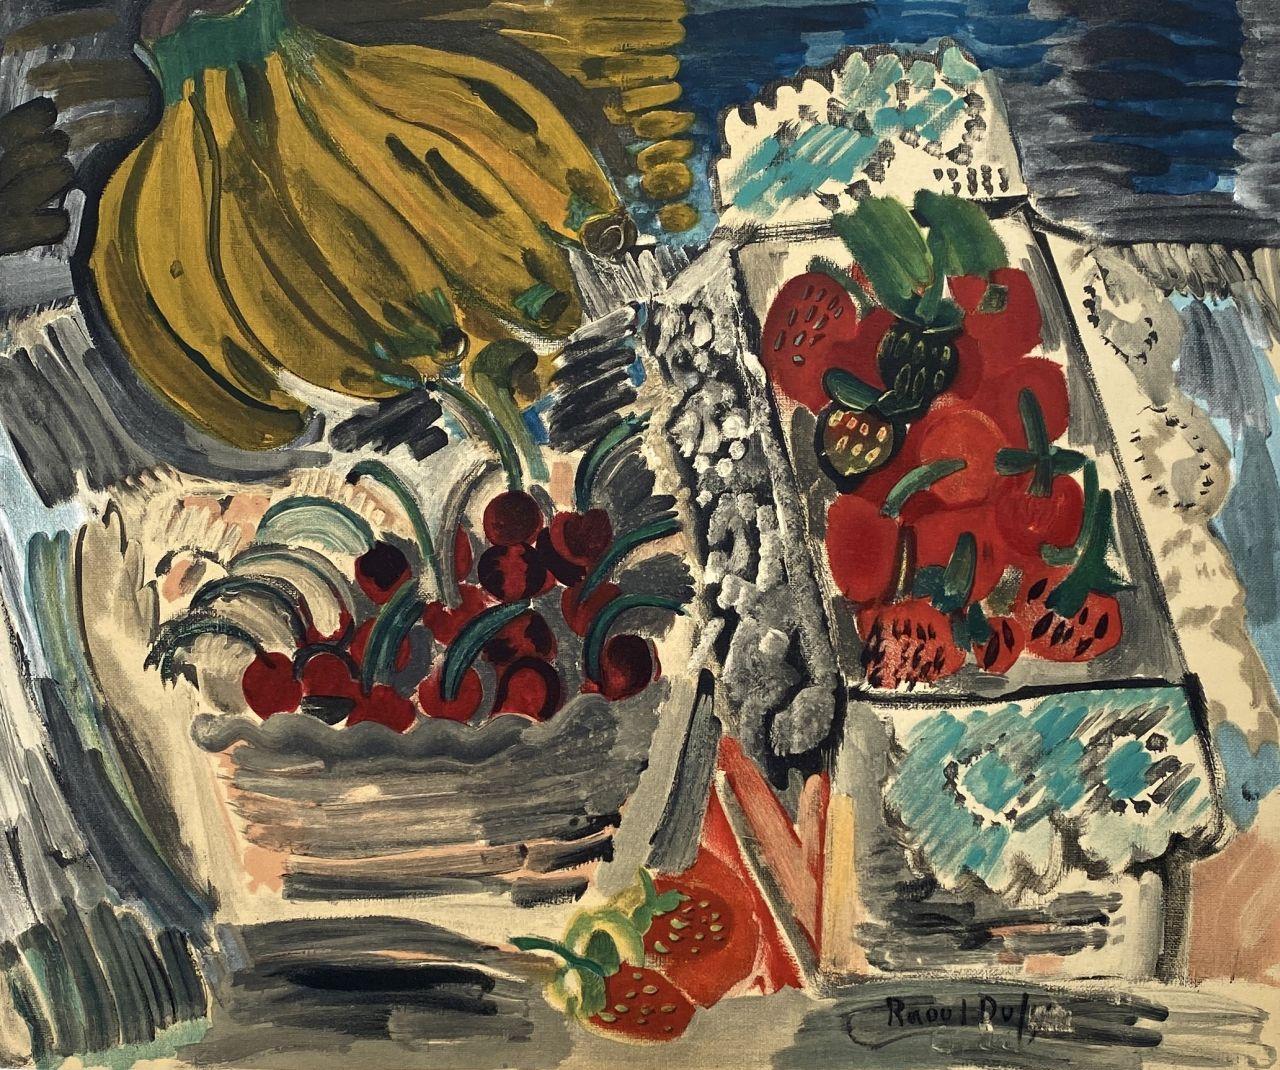 Still Life with Fruits - Lithograph Signed in the Plate (Mourlot) - Print by Raoul Dufy